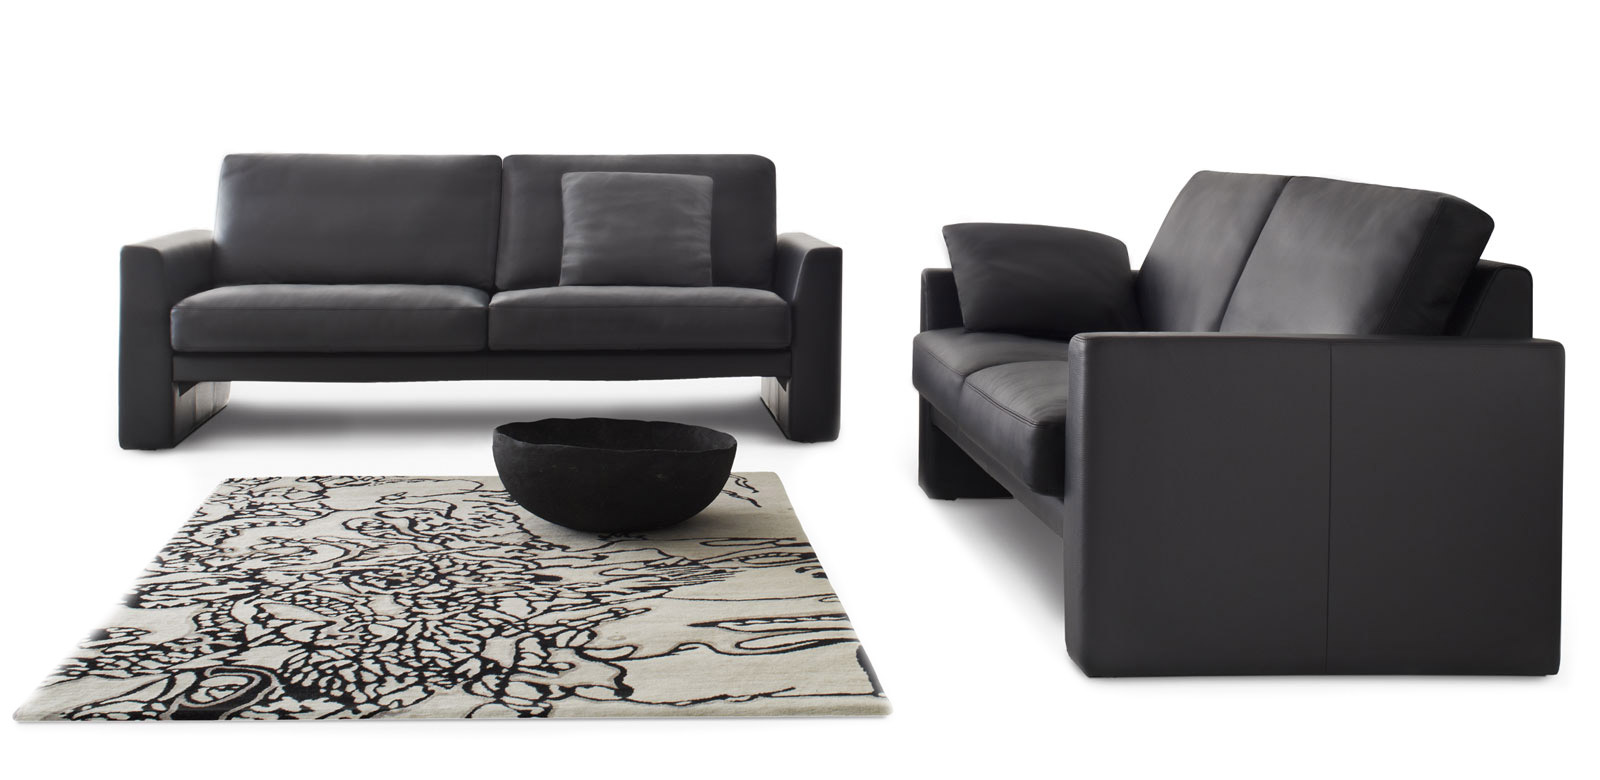 CL100 sofa group in black leather with matching cushions.